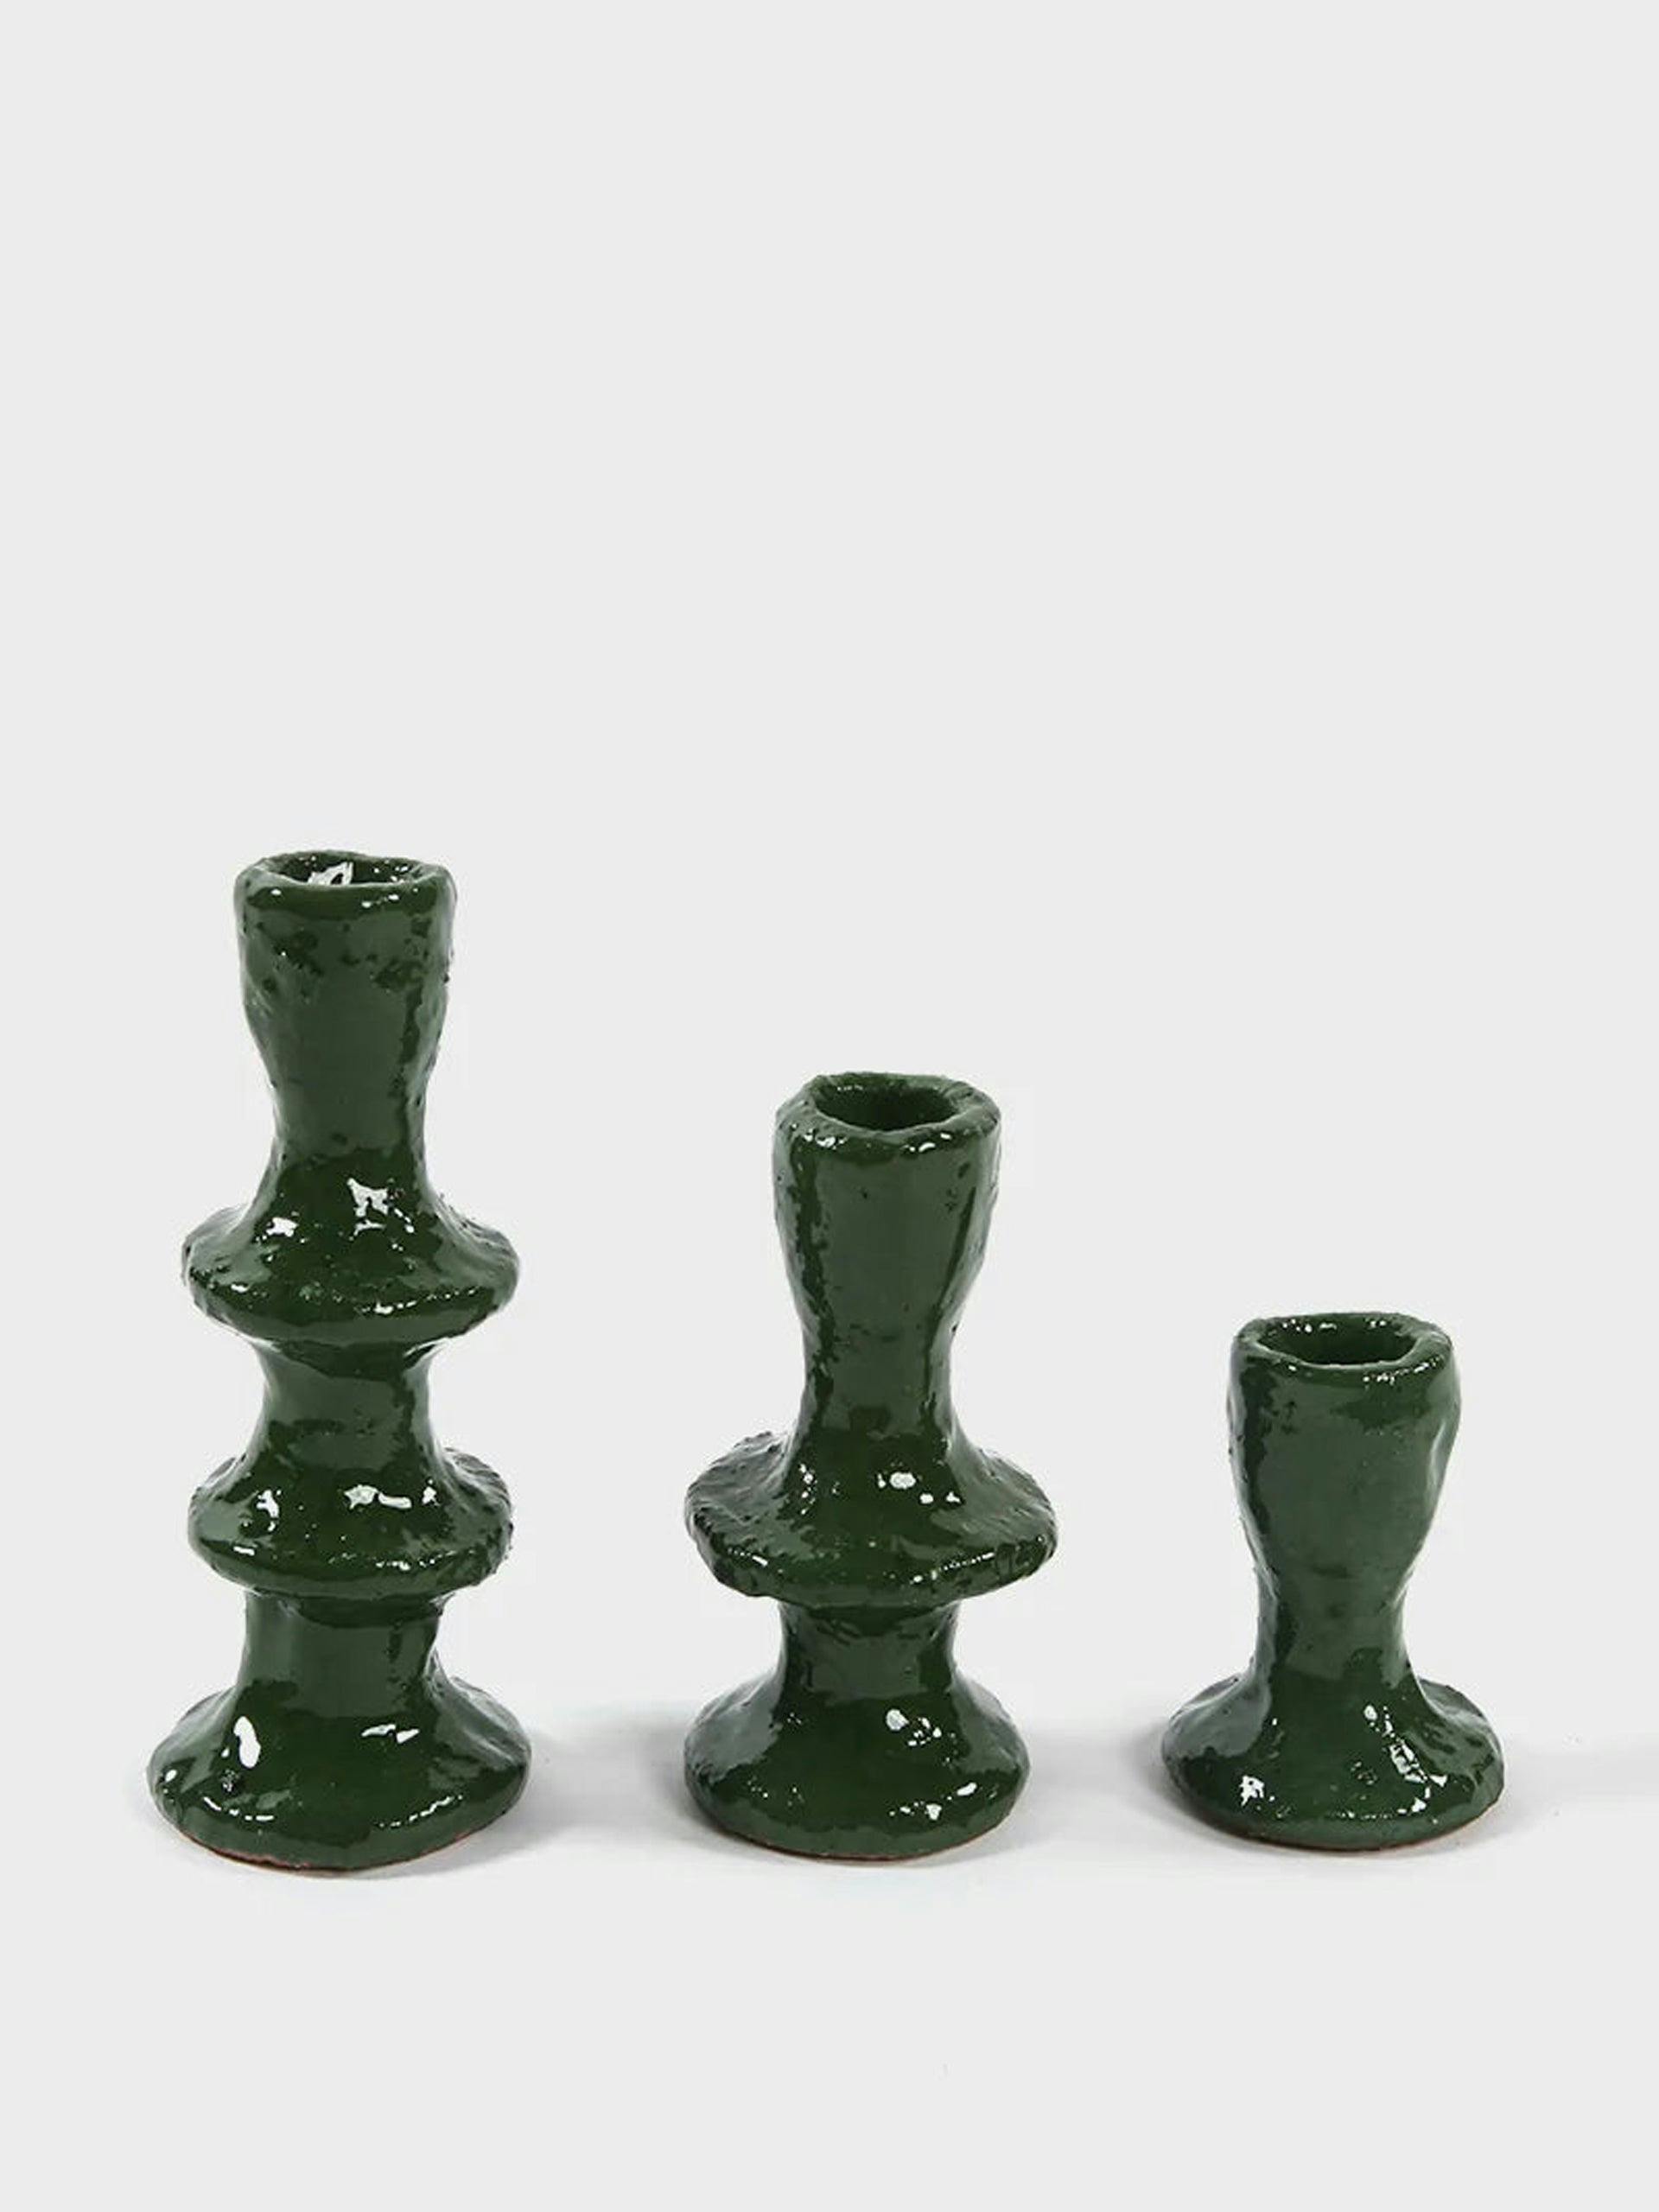 Wonky candlestick in moss green